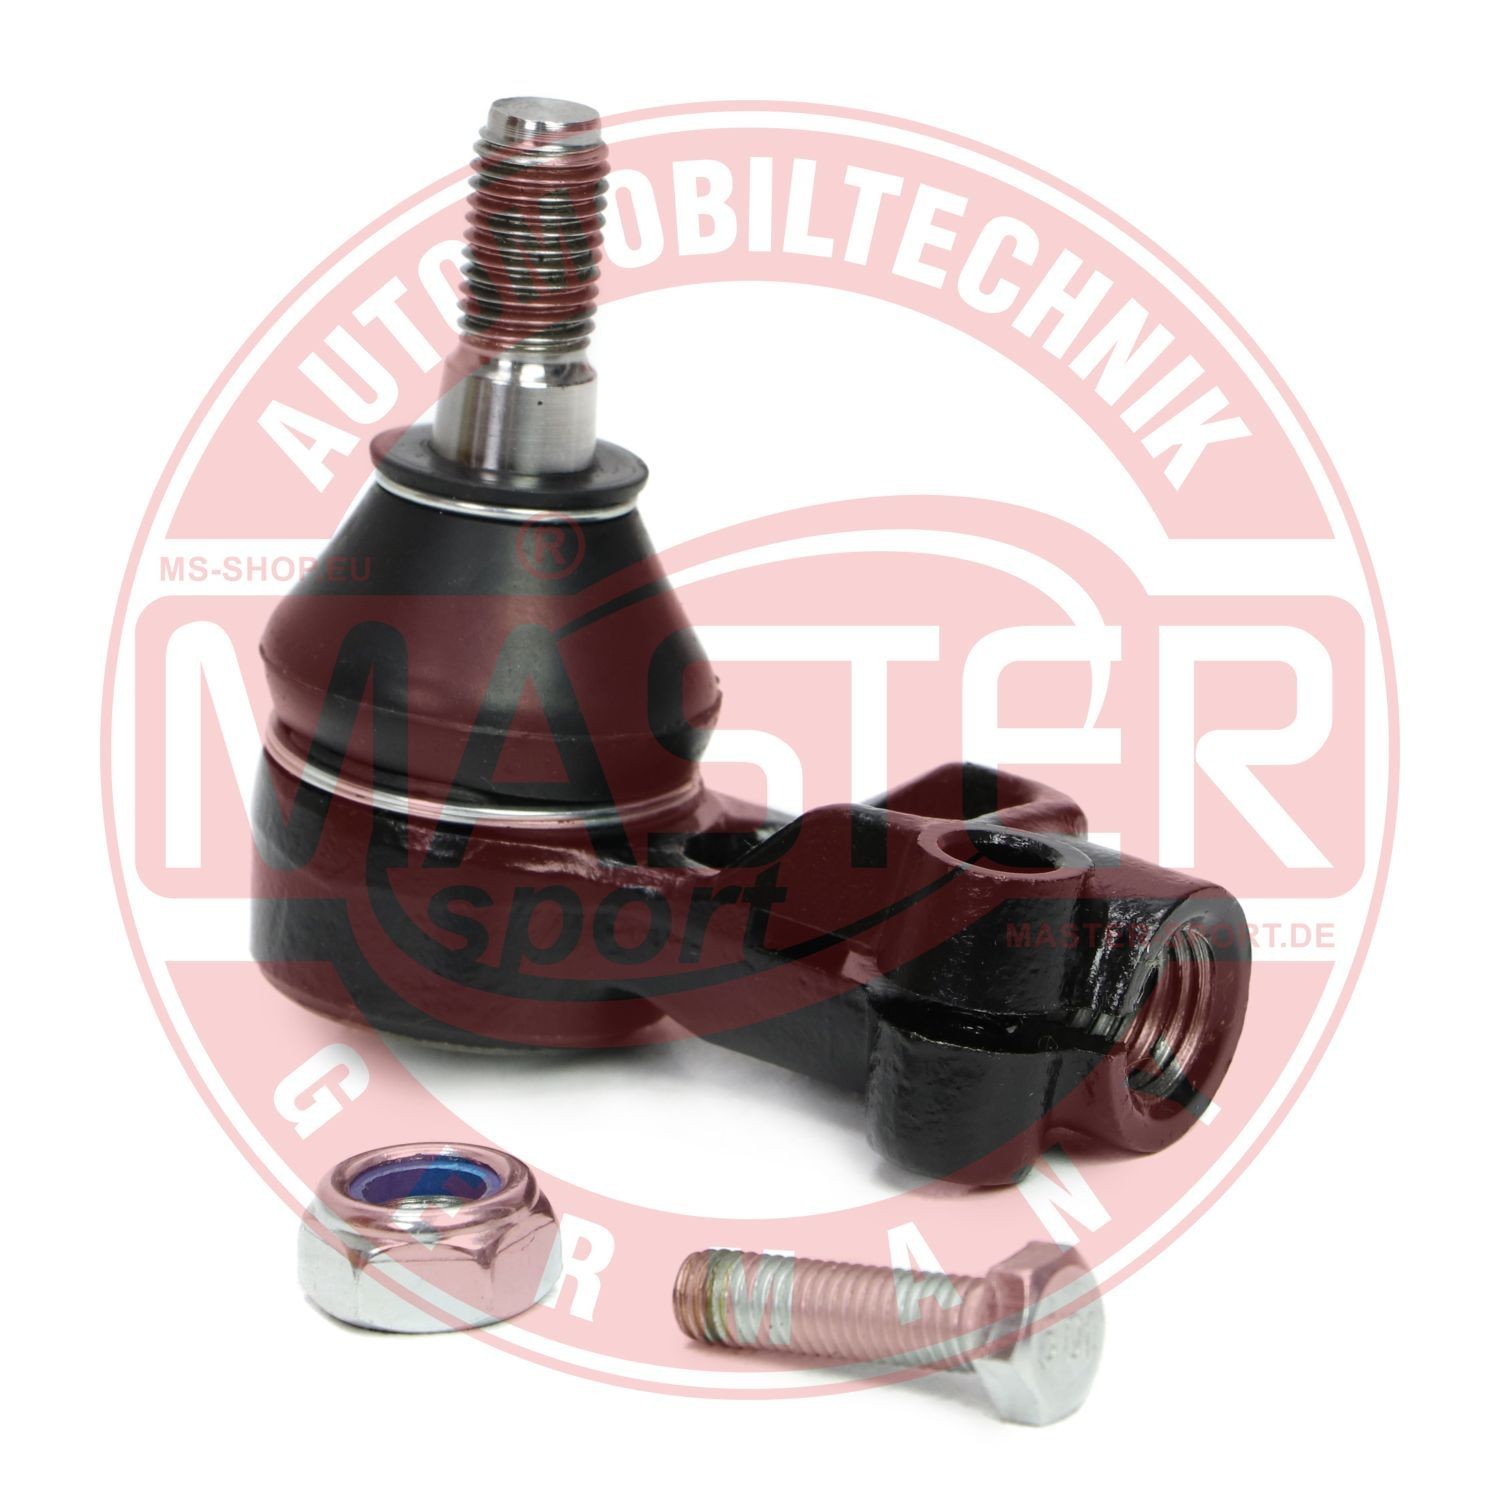 Opel ZAFIRA Track rod end ball joint 8913670 MASTER-SPORT 12180-SET-MS online buy